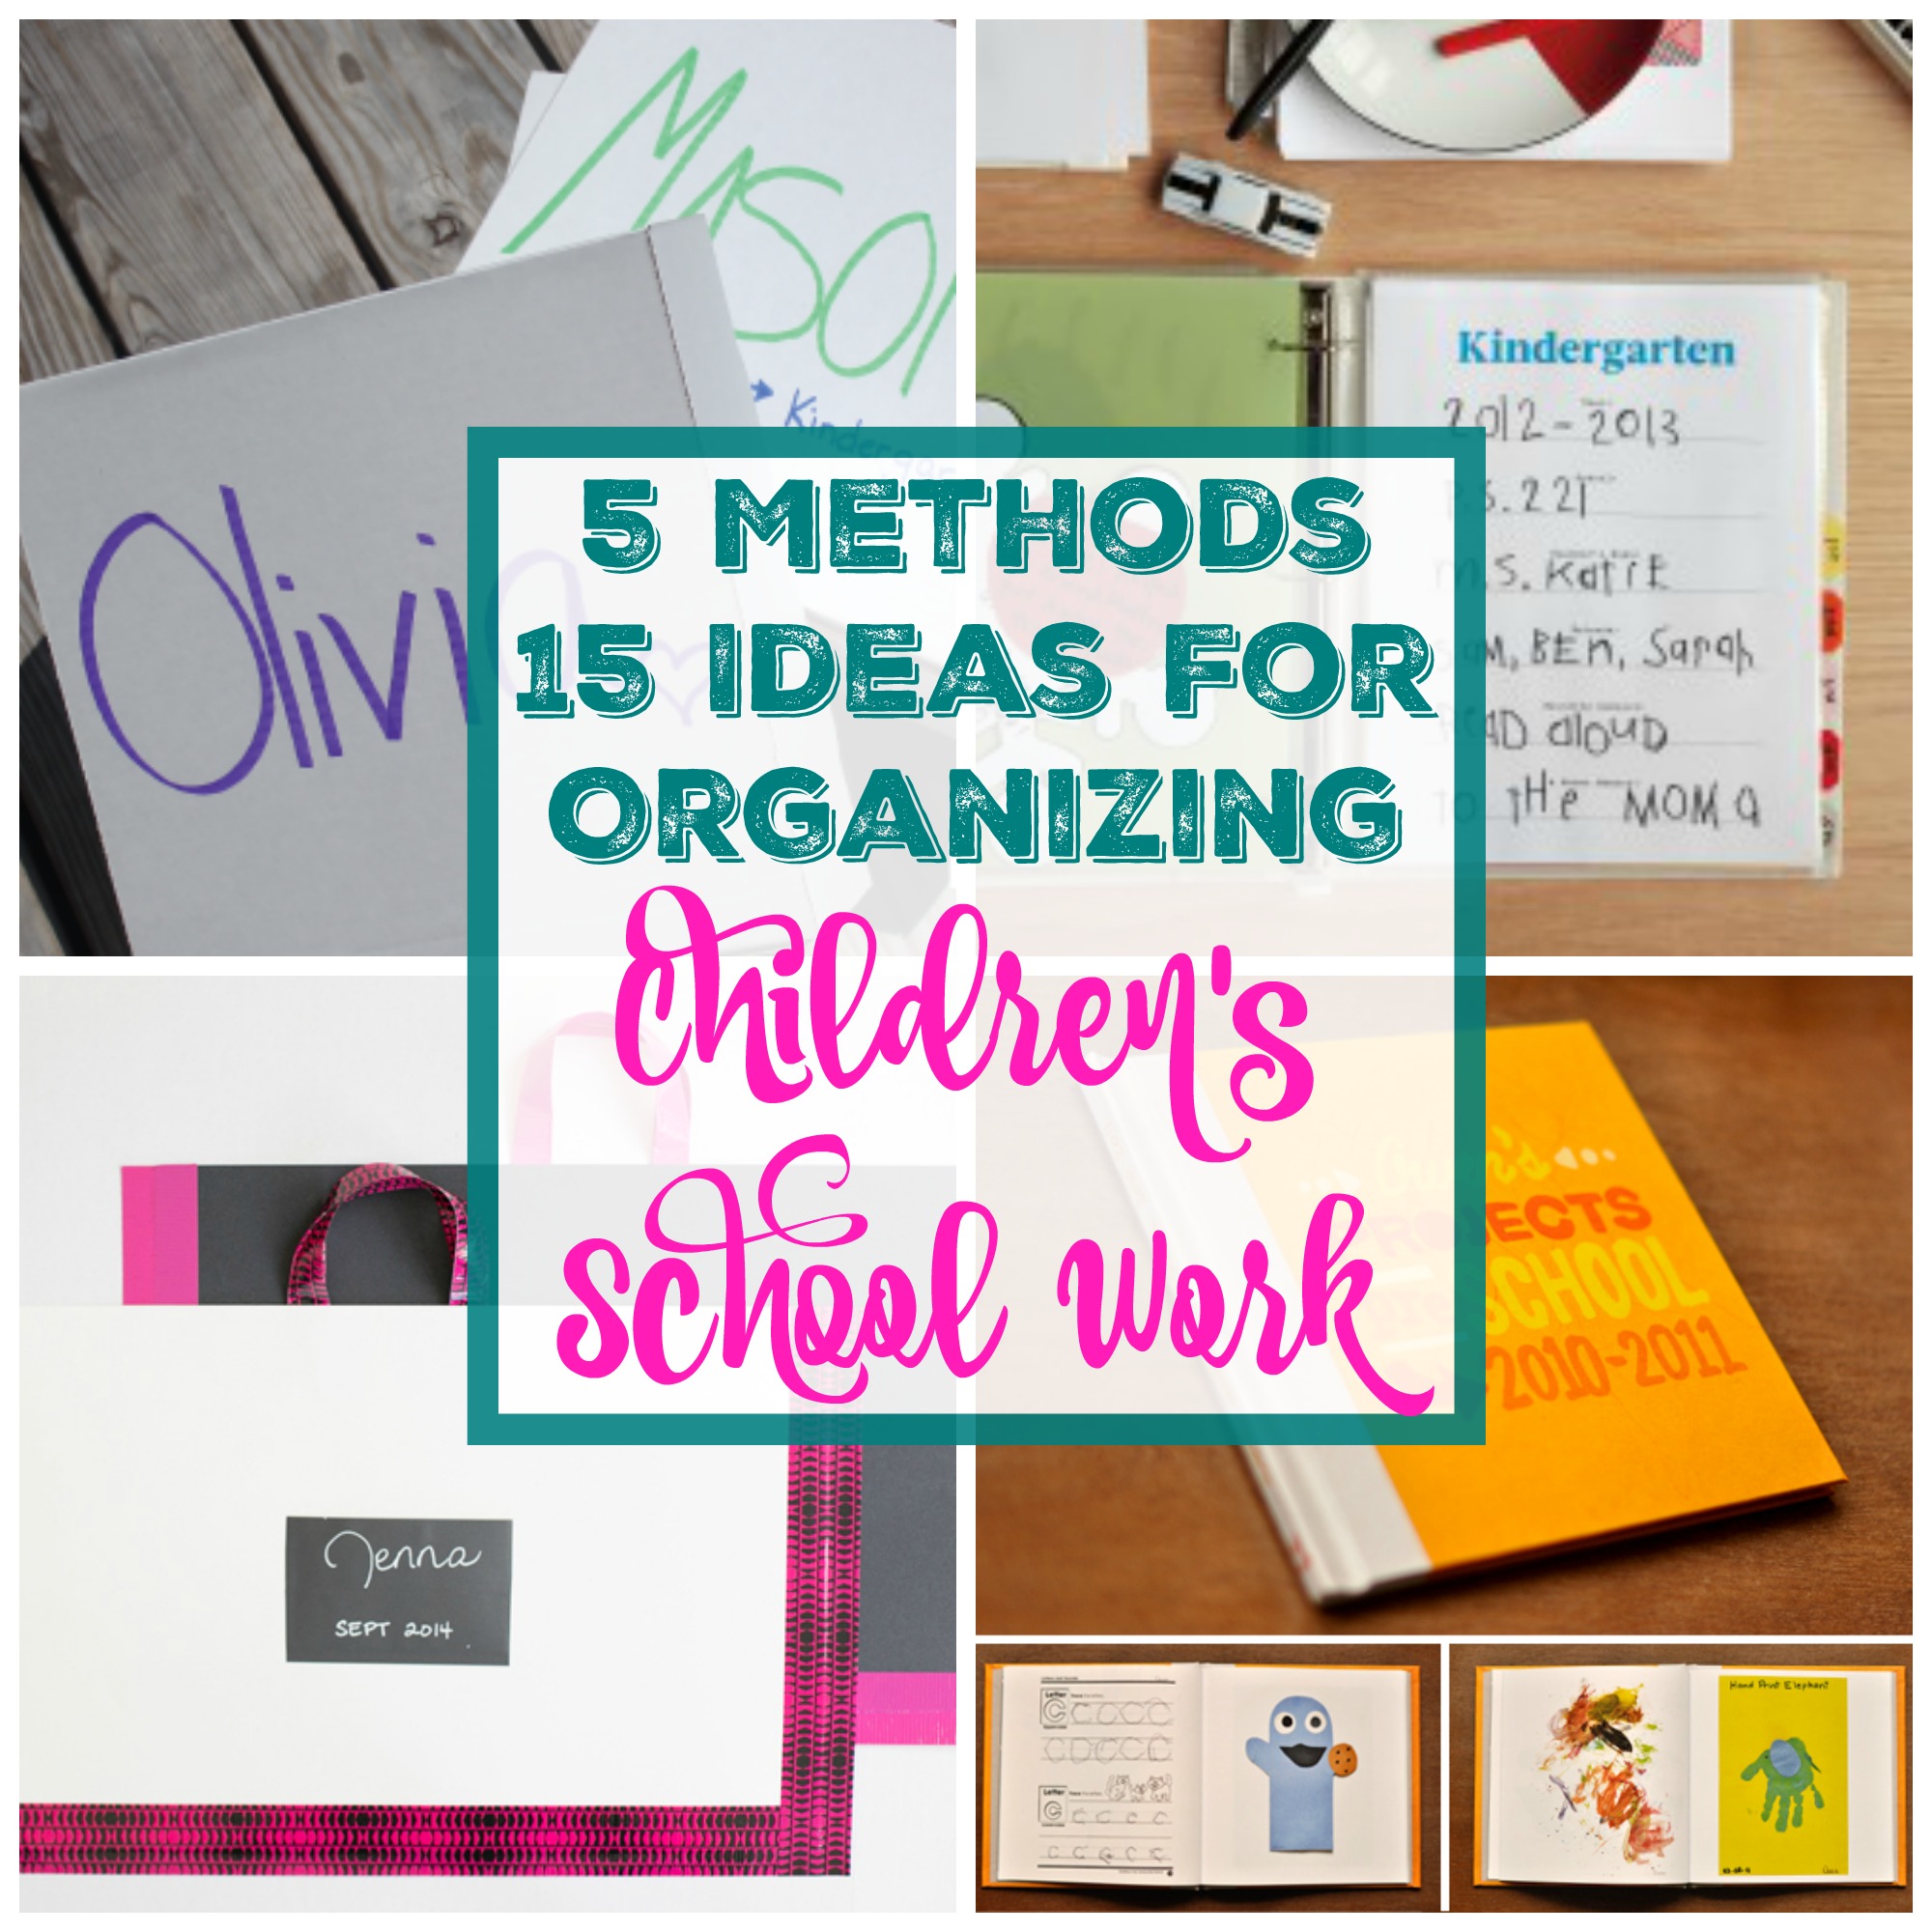 15 Fantastic Ideas for Organizing and Storing Children’s School Work